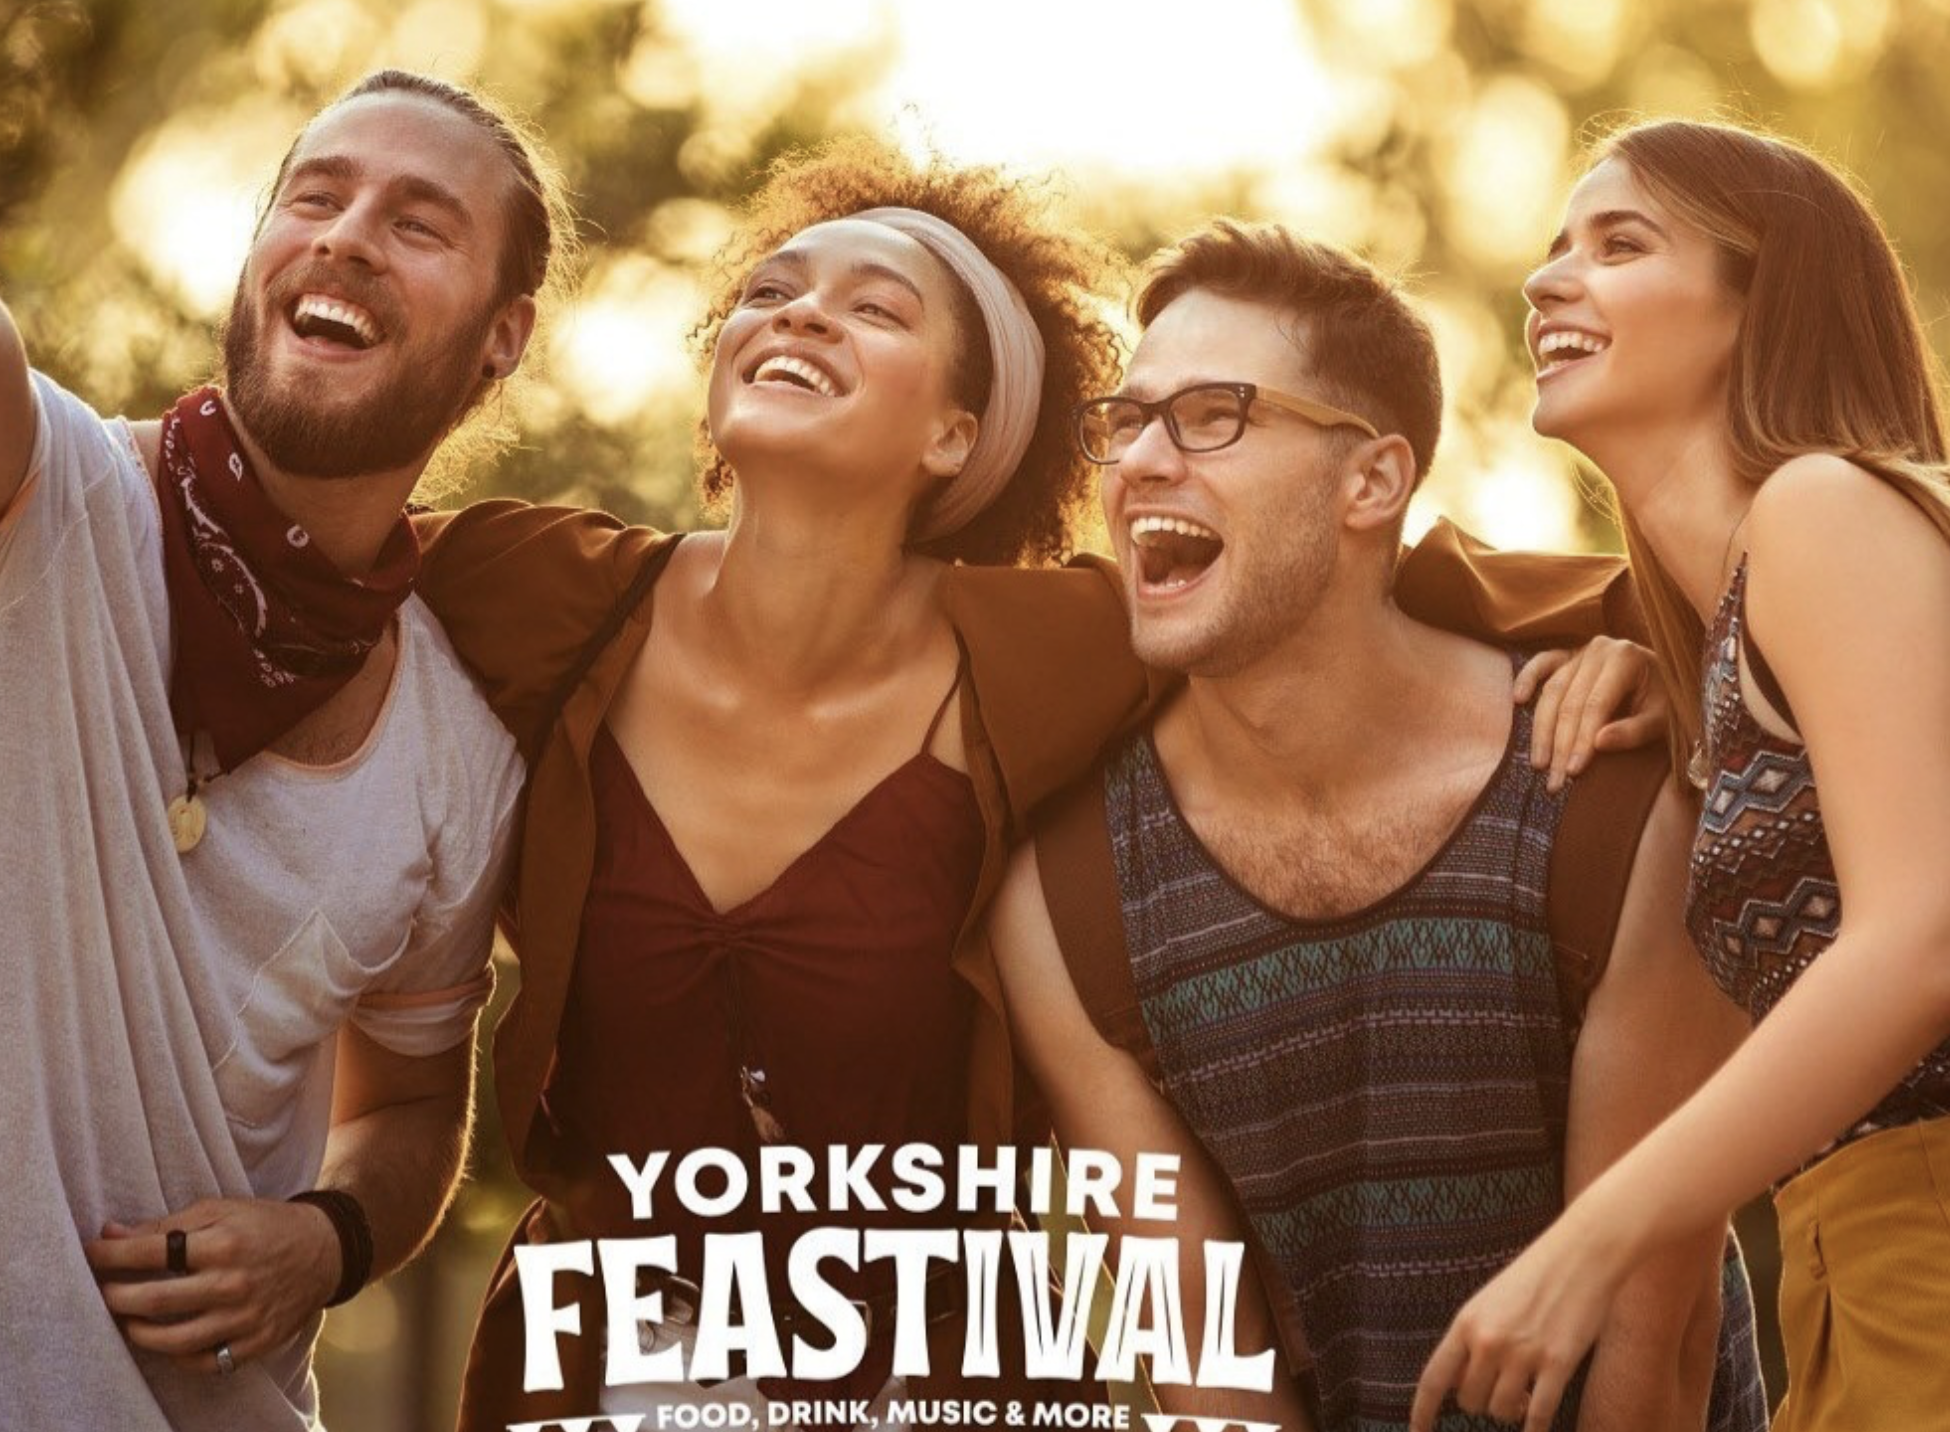 The Yorkshire FEASTival